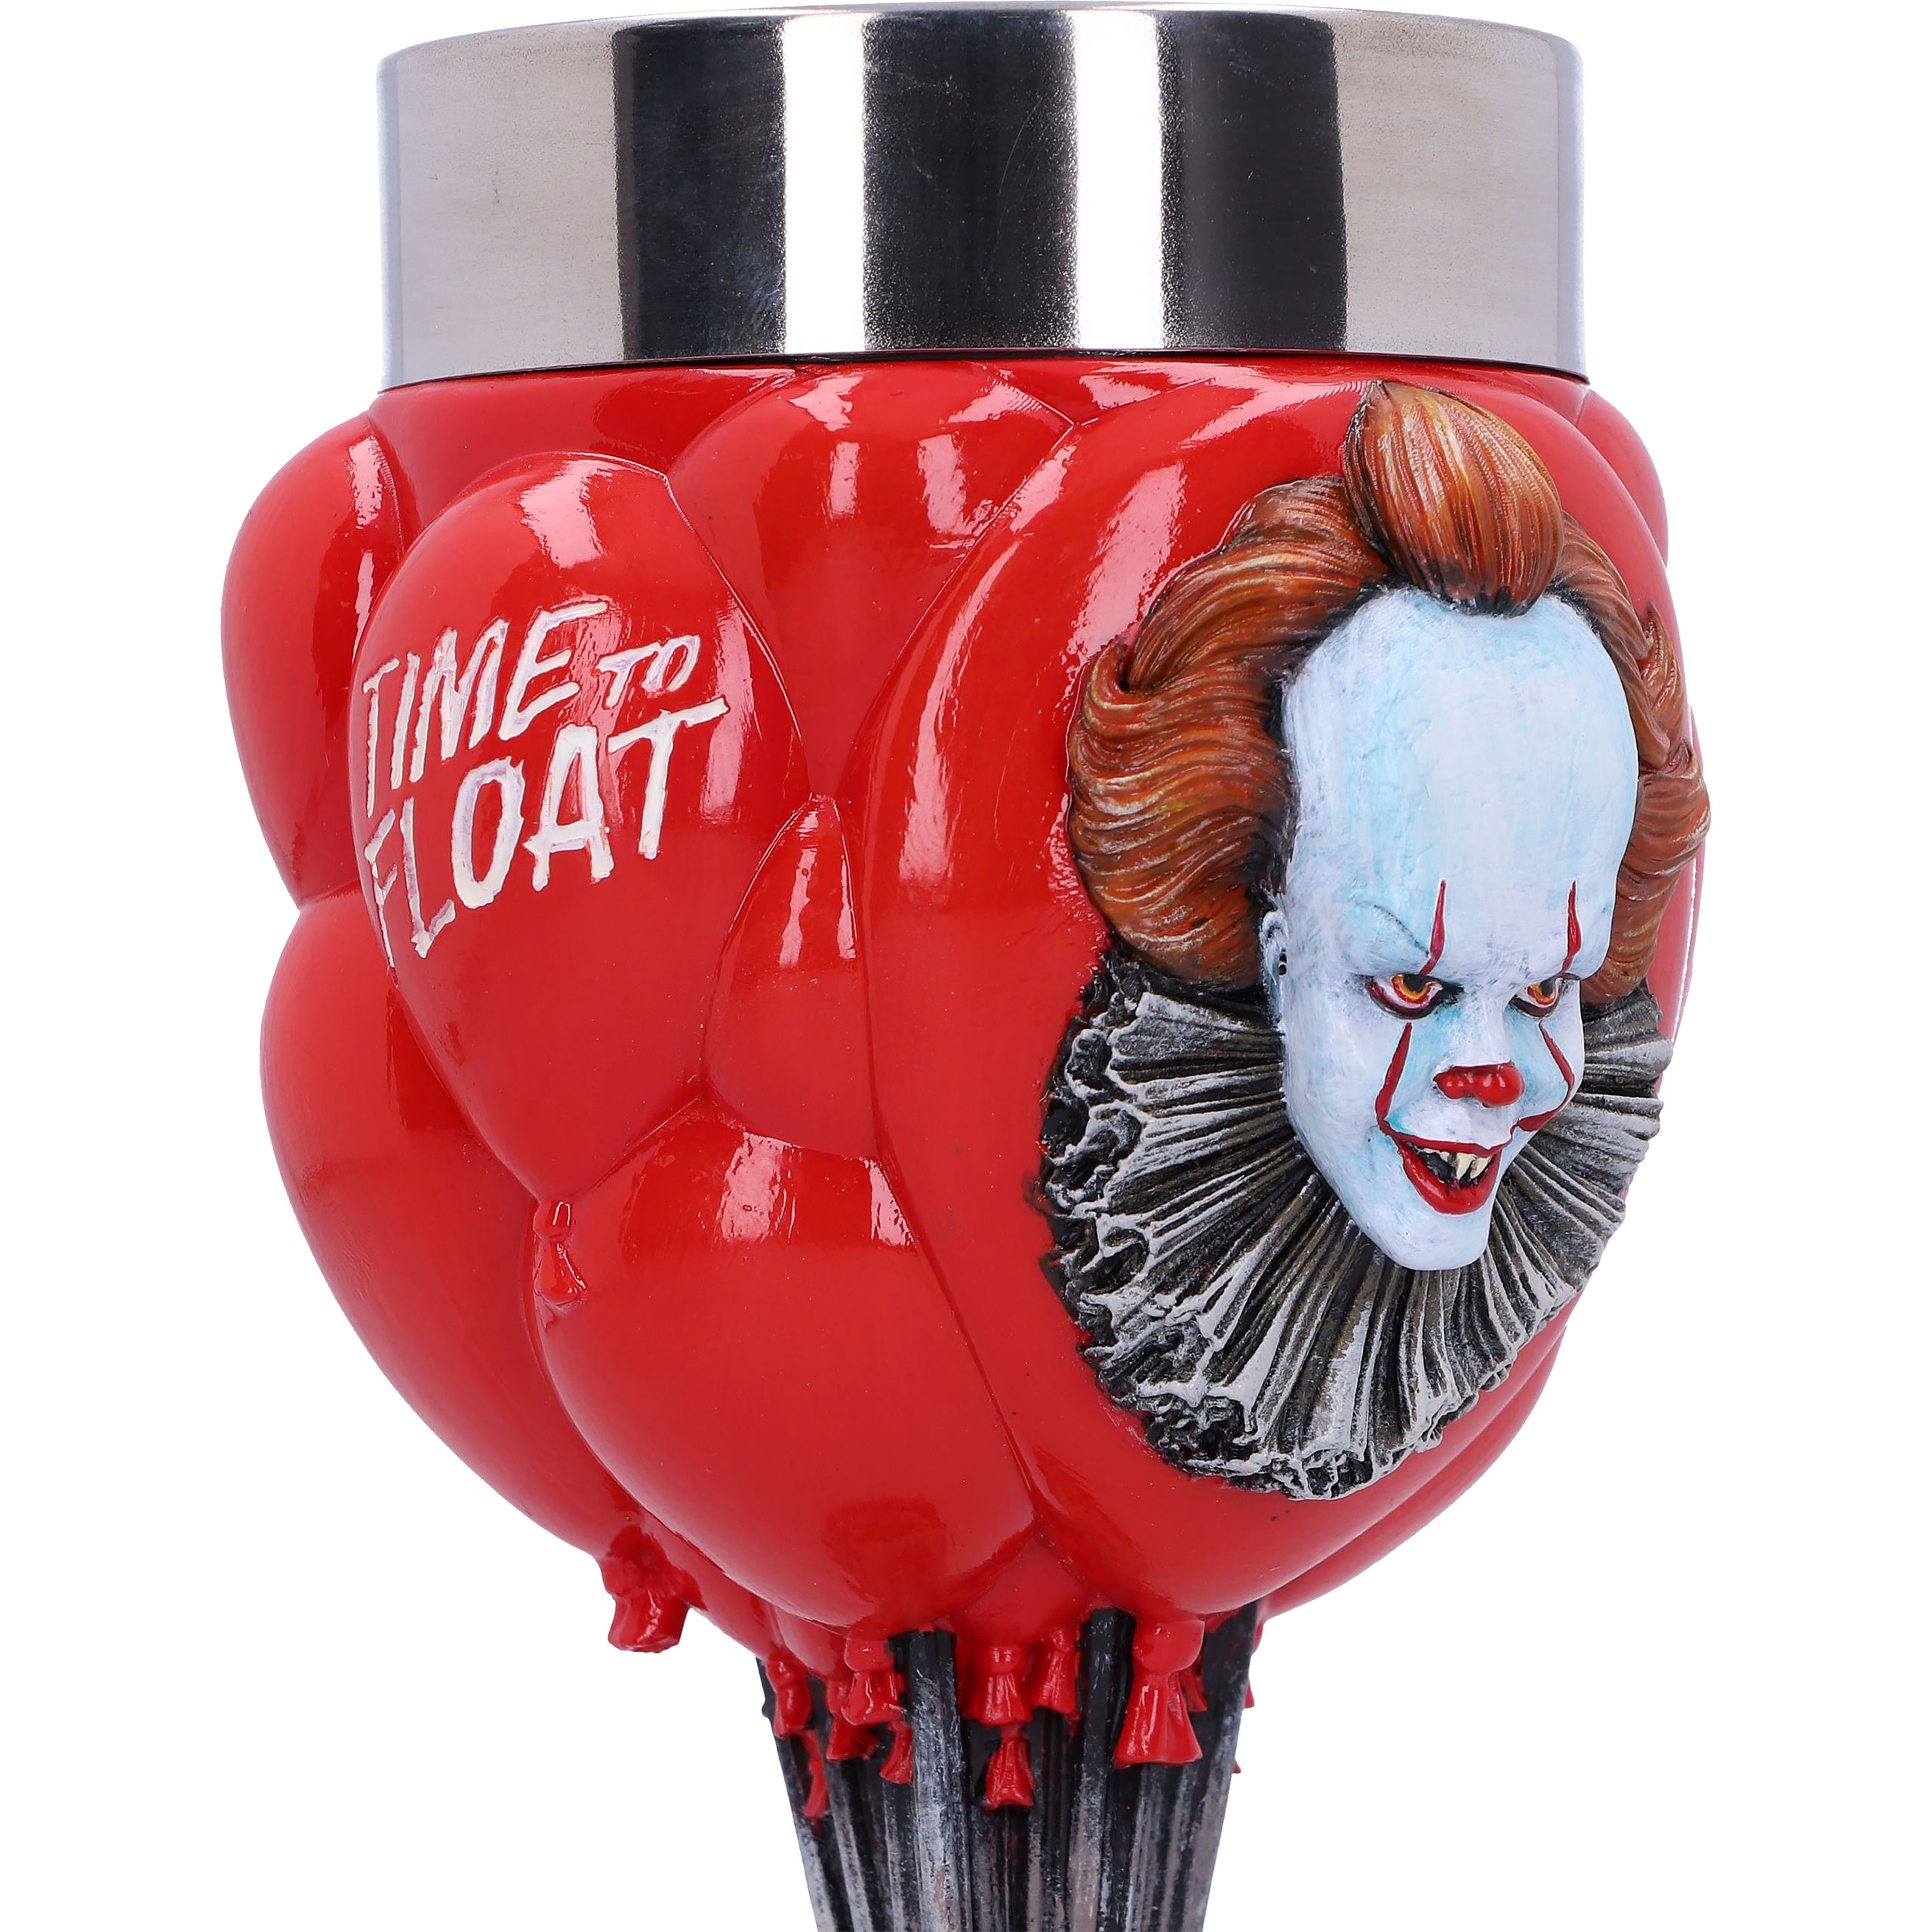 Stephen King's IT - Pennywise Deluxe Goblet